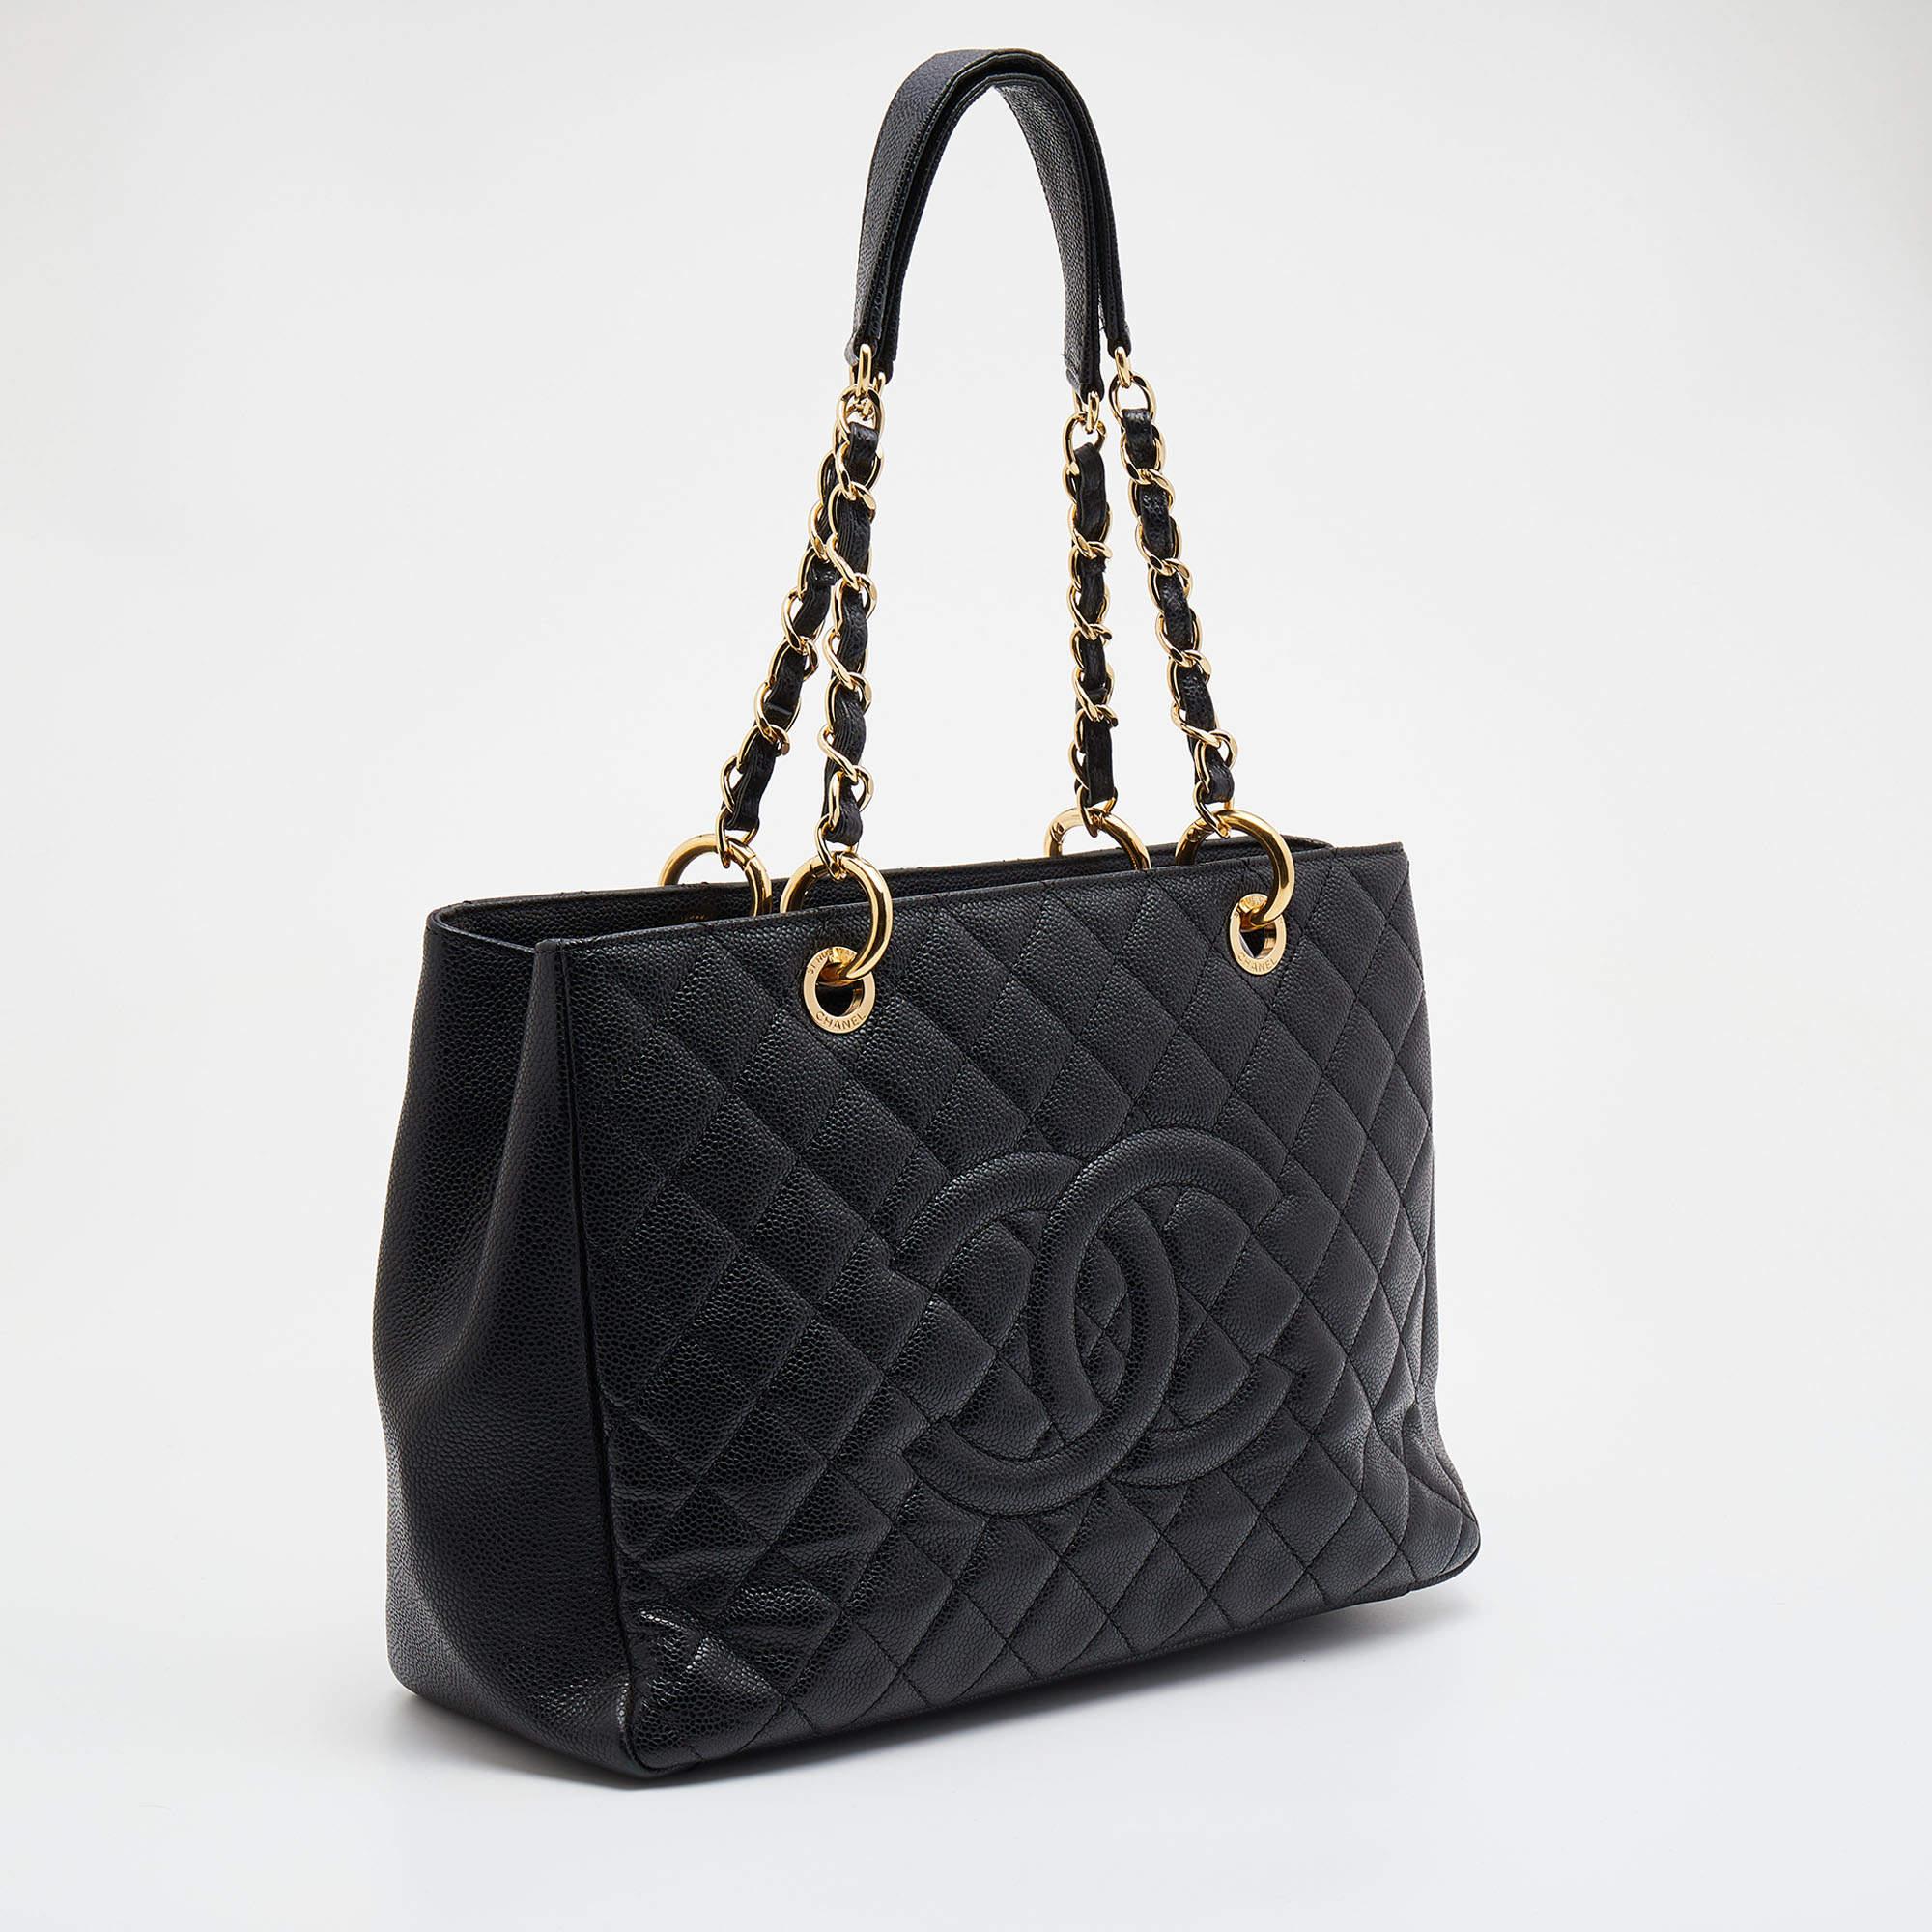 Chanel Black Quilted Caviar Leather GST Shopper Tote 10